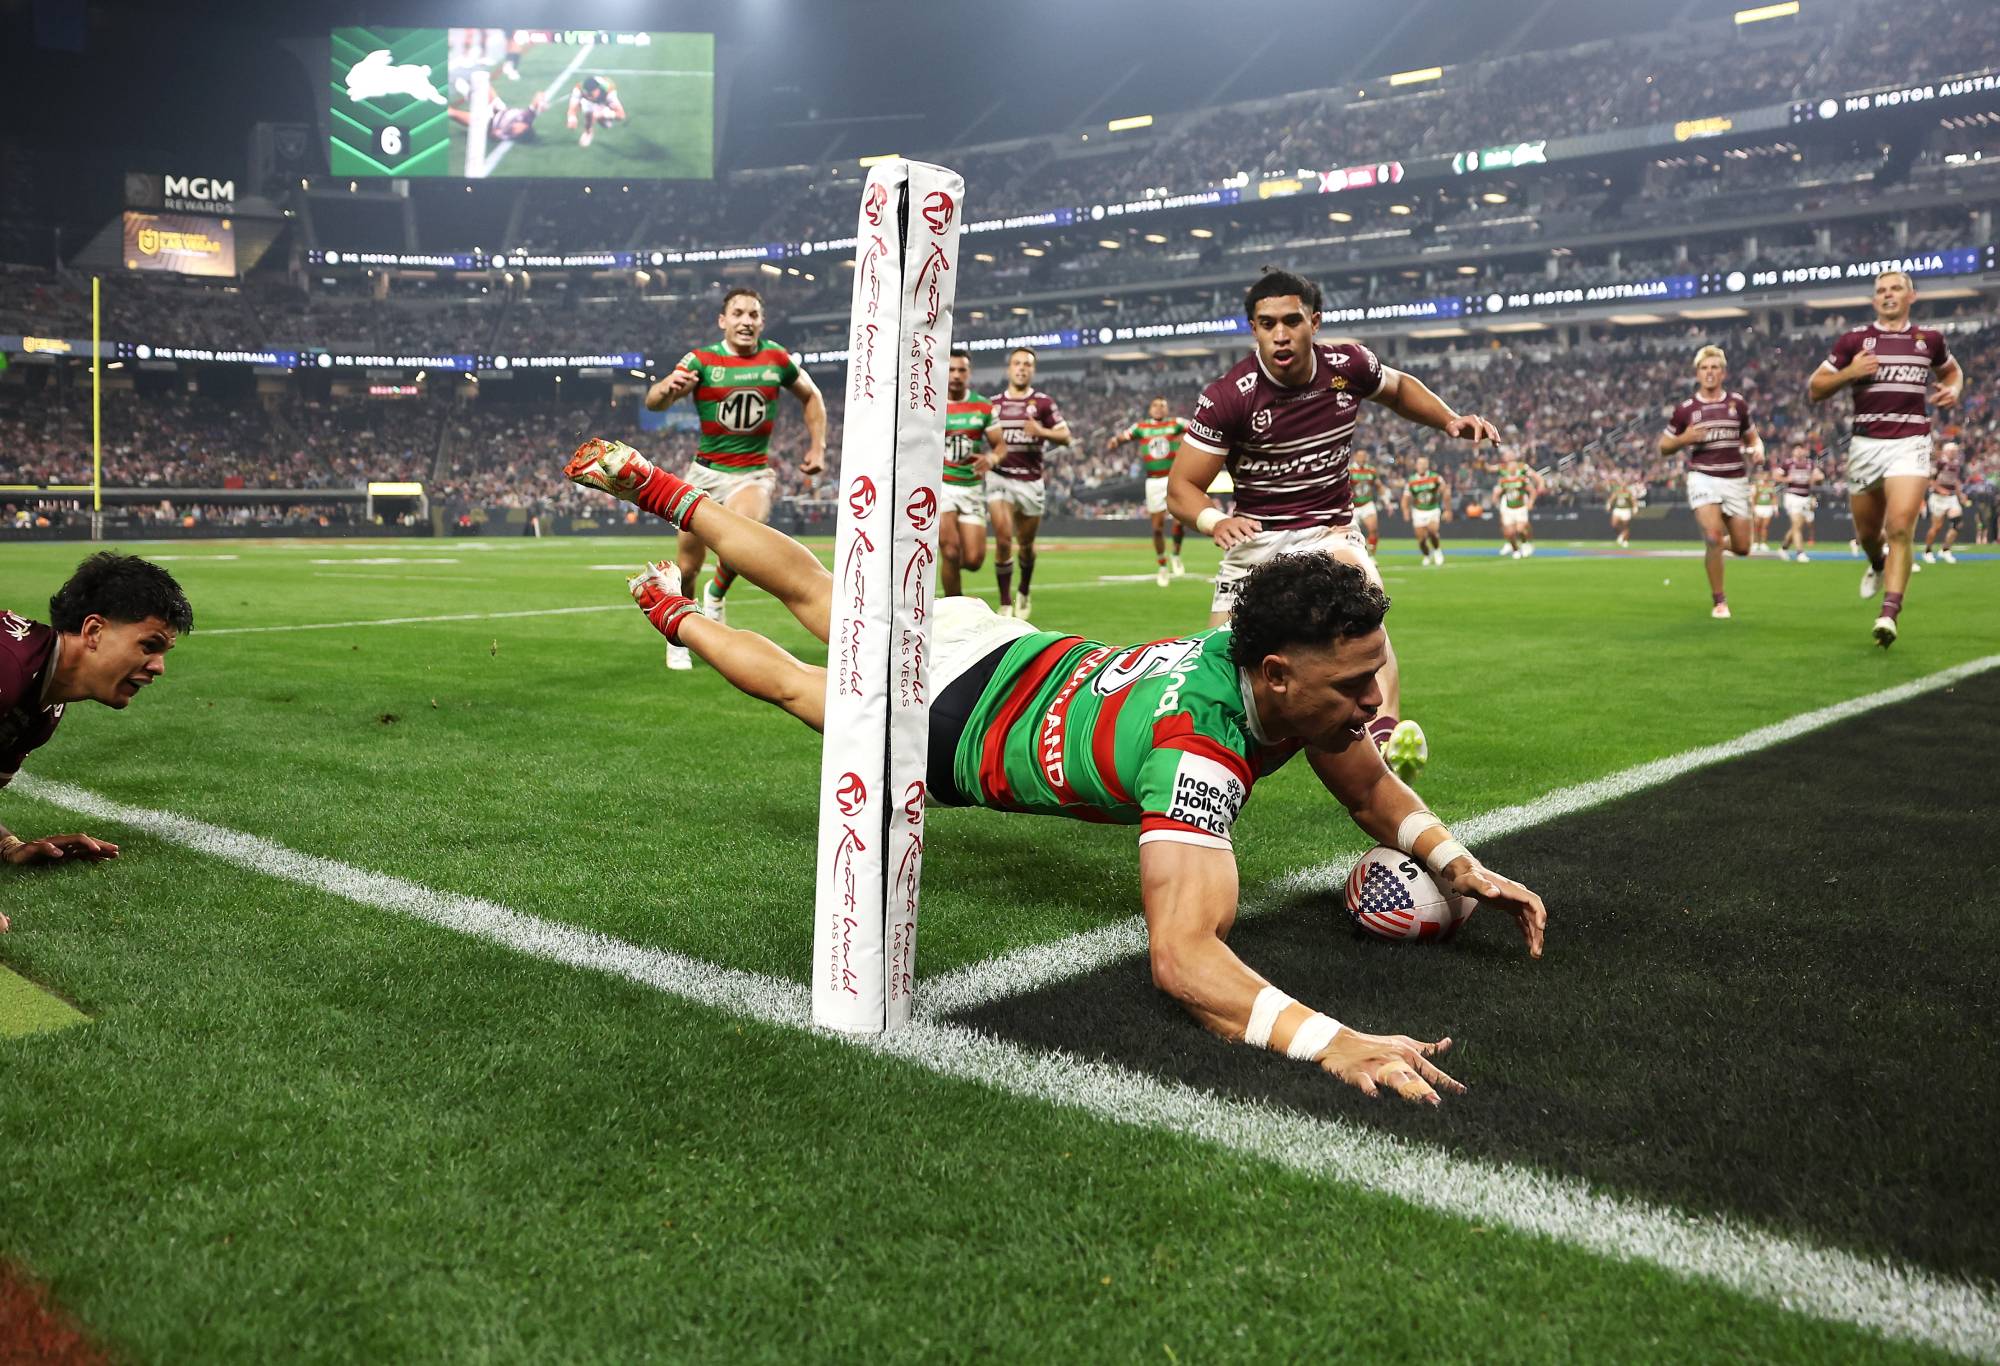 LAS VEGAS, NEVADA - MARCH 02: Jacob Gagai of the Rabbitohs scores a try during the round one NRL match between Manly Sea Eagles and South Sydney Rabbitohs at Allegiant Stadium, on March 02, 2024, in Las Vegas, Nevada. (Photo by Ezra Shaw/Getty Images)